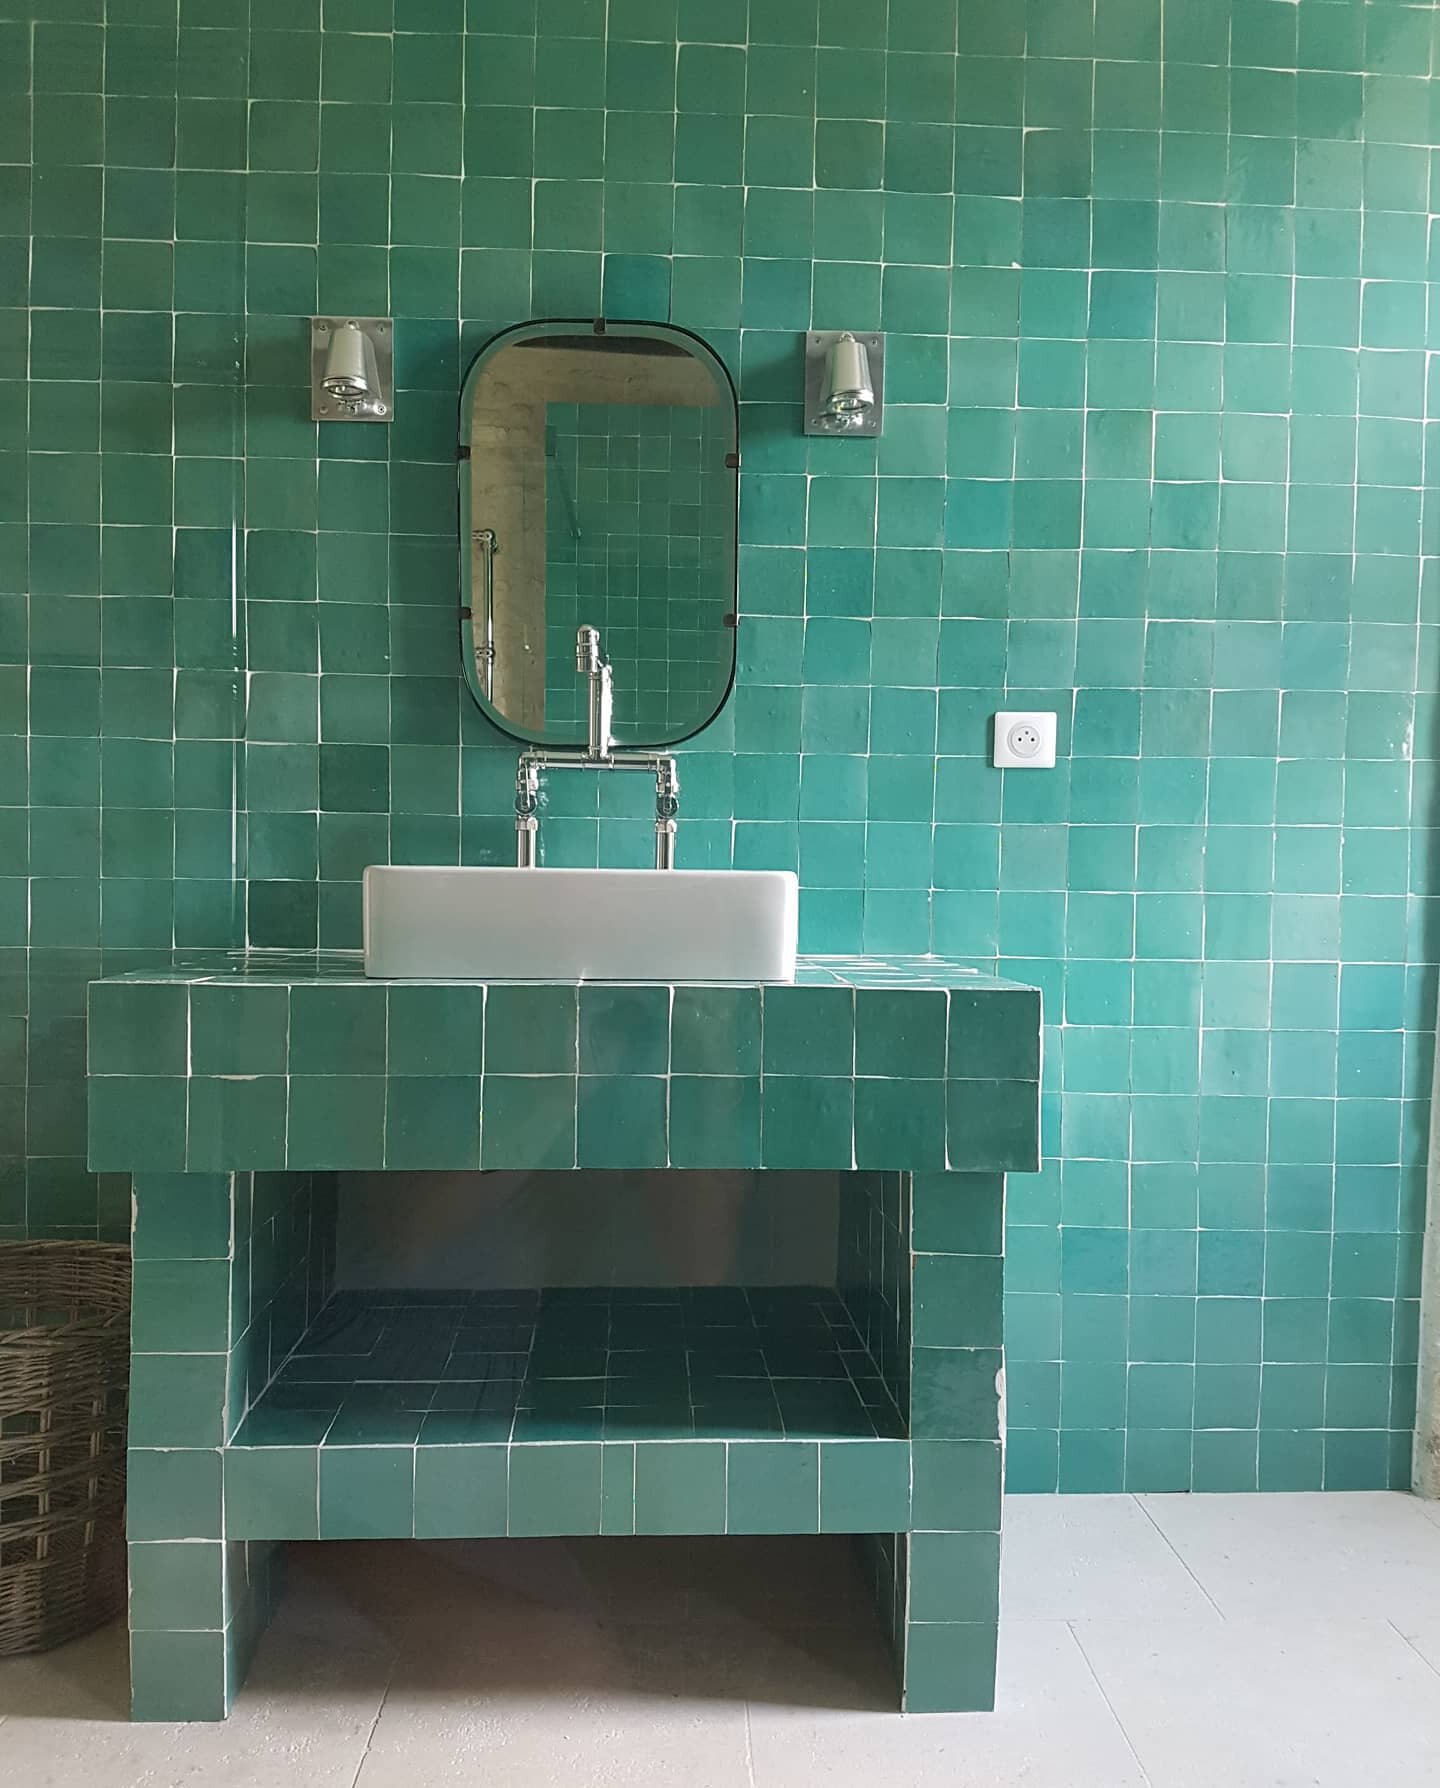 A bathroom we completed last year. Floor to ceiling Emery et Cie/ Zellige tiles. Vanity unit and sanitaryware all designed and sourced by CFI. Bold and simple. Love it 🚿🛁 #emeryetcie #emeryetcietiles #zelligetiles #retrouvius #bathroom #clarefontes